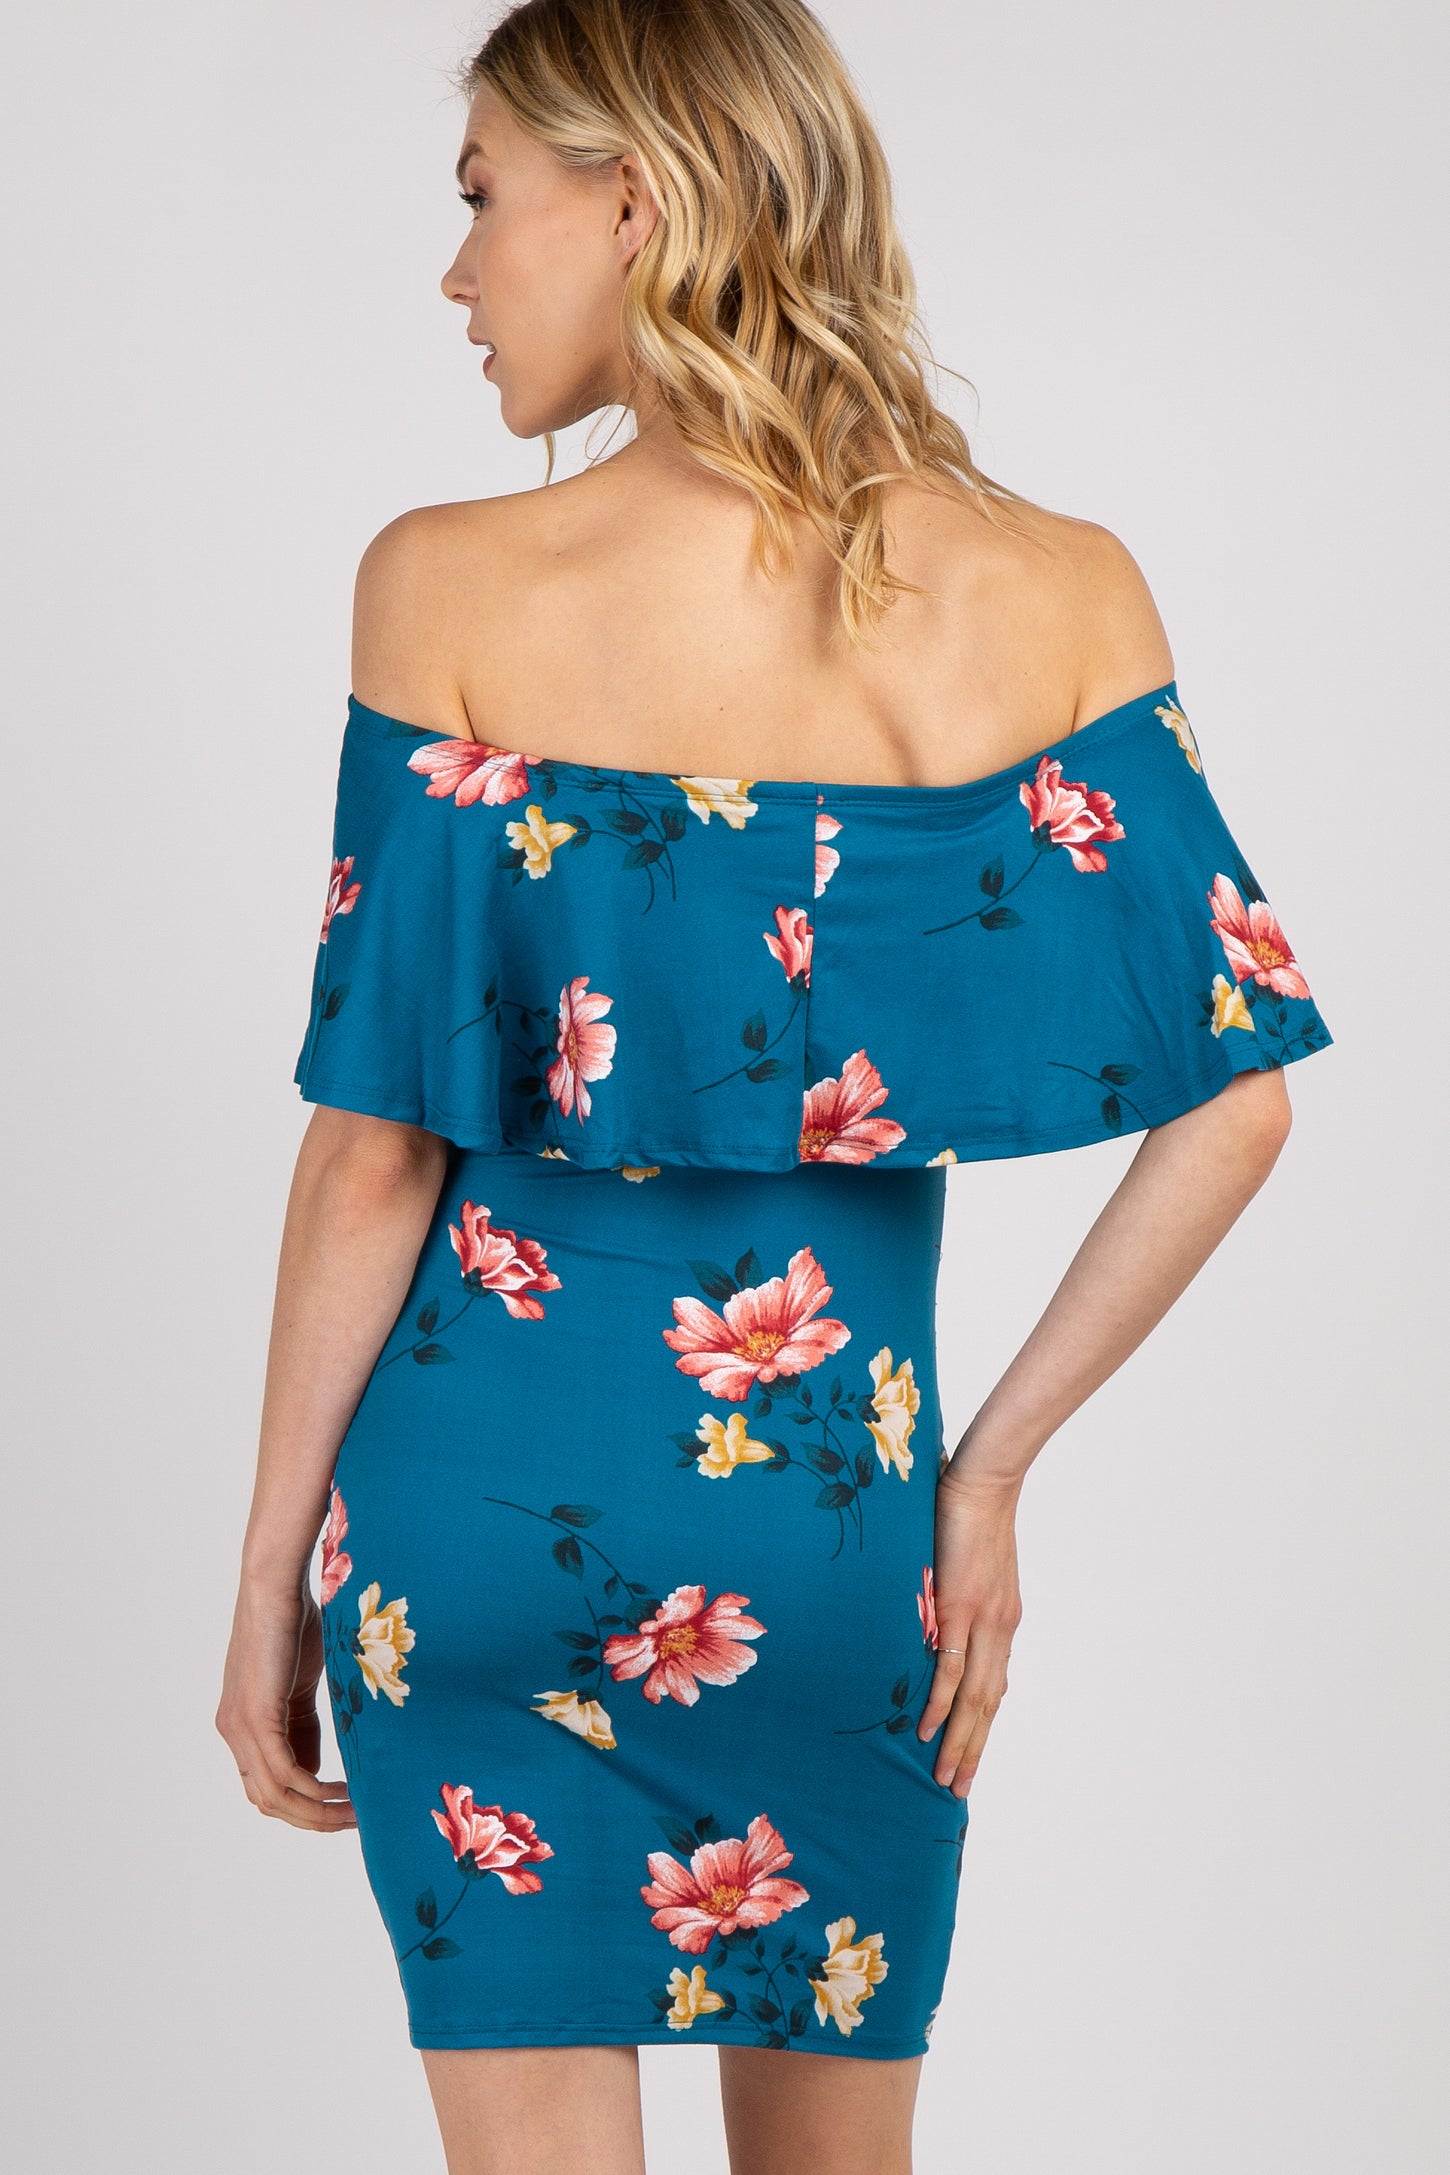 Teal Floral Ruffle Trim Fitted Maternity Dress